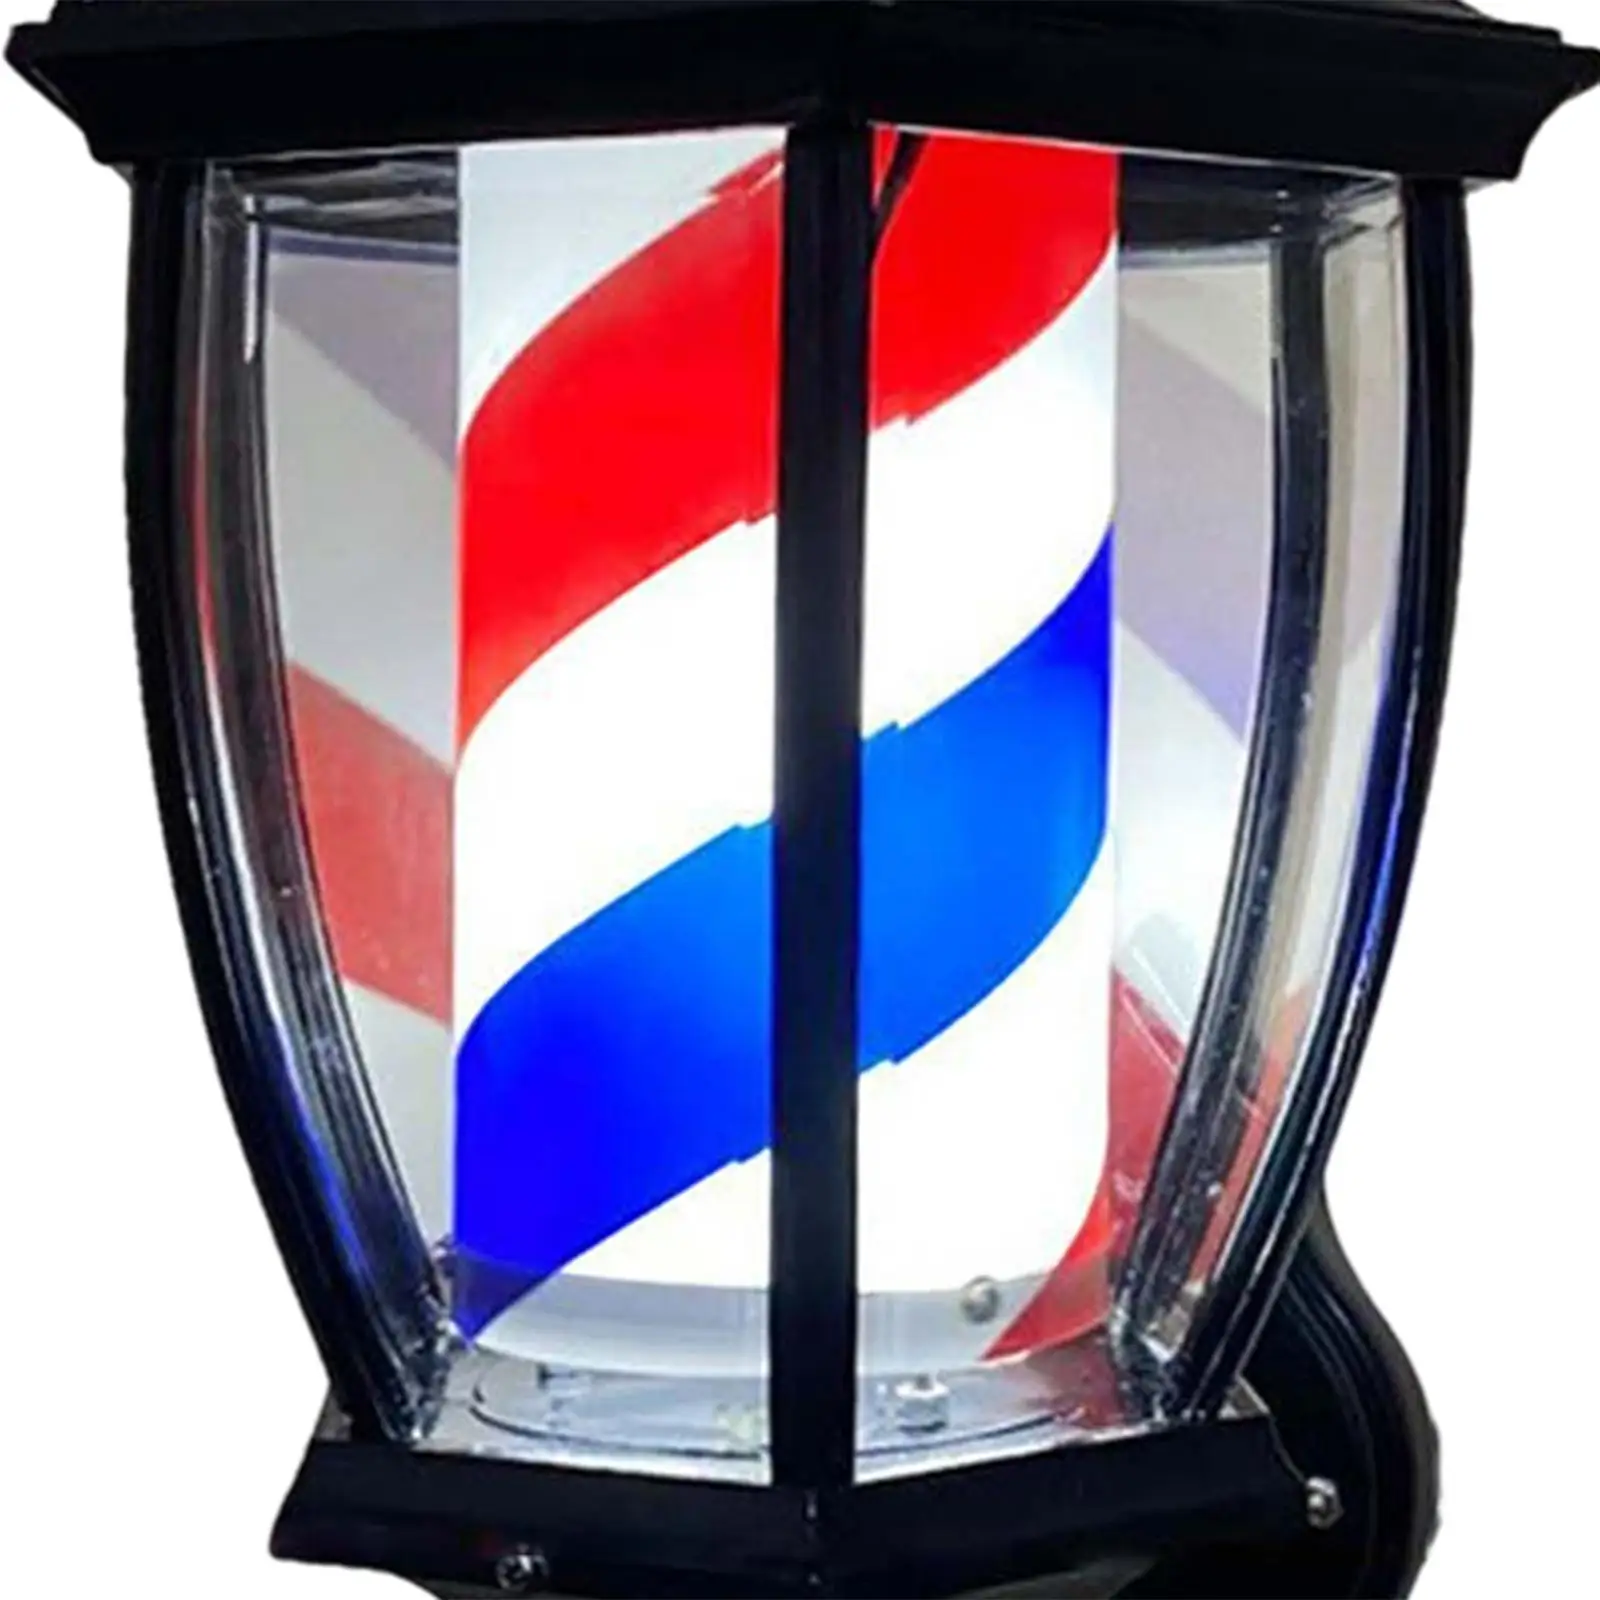 Barber Pole Light Rotating Rainproof Novelty Lighting Neon Signs Hairdressing Hair Salon open signs Classic Wall Mount Stripes